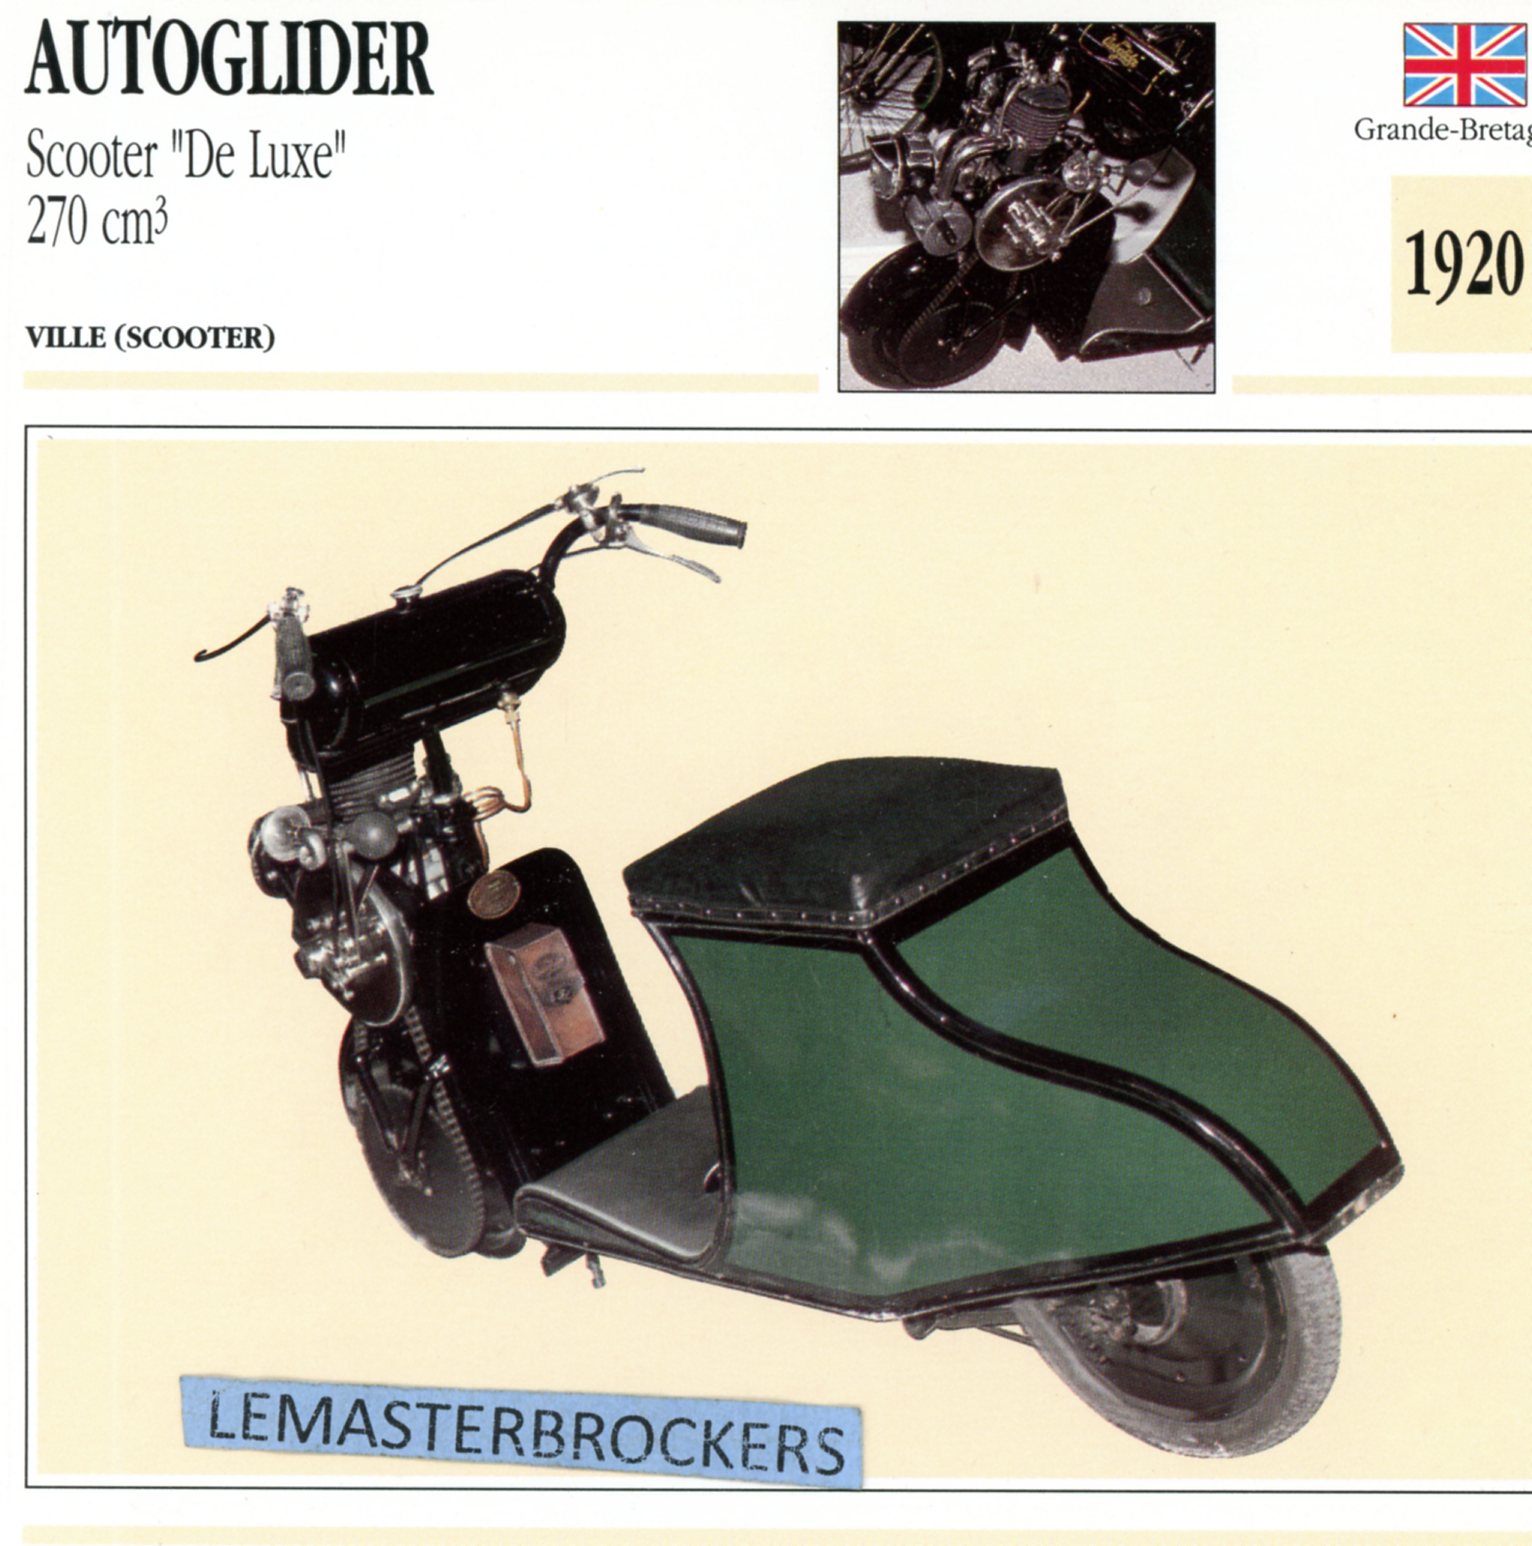 AUTOGLIDER SCOOTER LUXE 1920-CARTE-CARD-FICHE-SCOOTER-LEMASTERBROCKERS